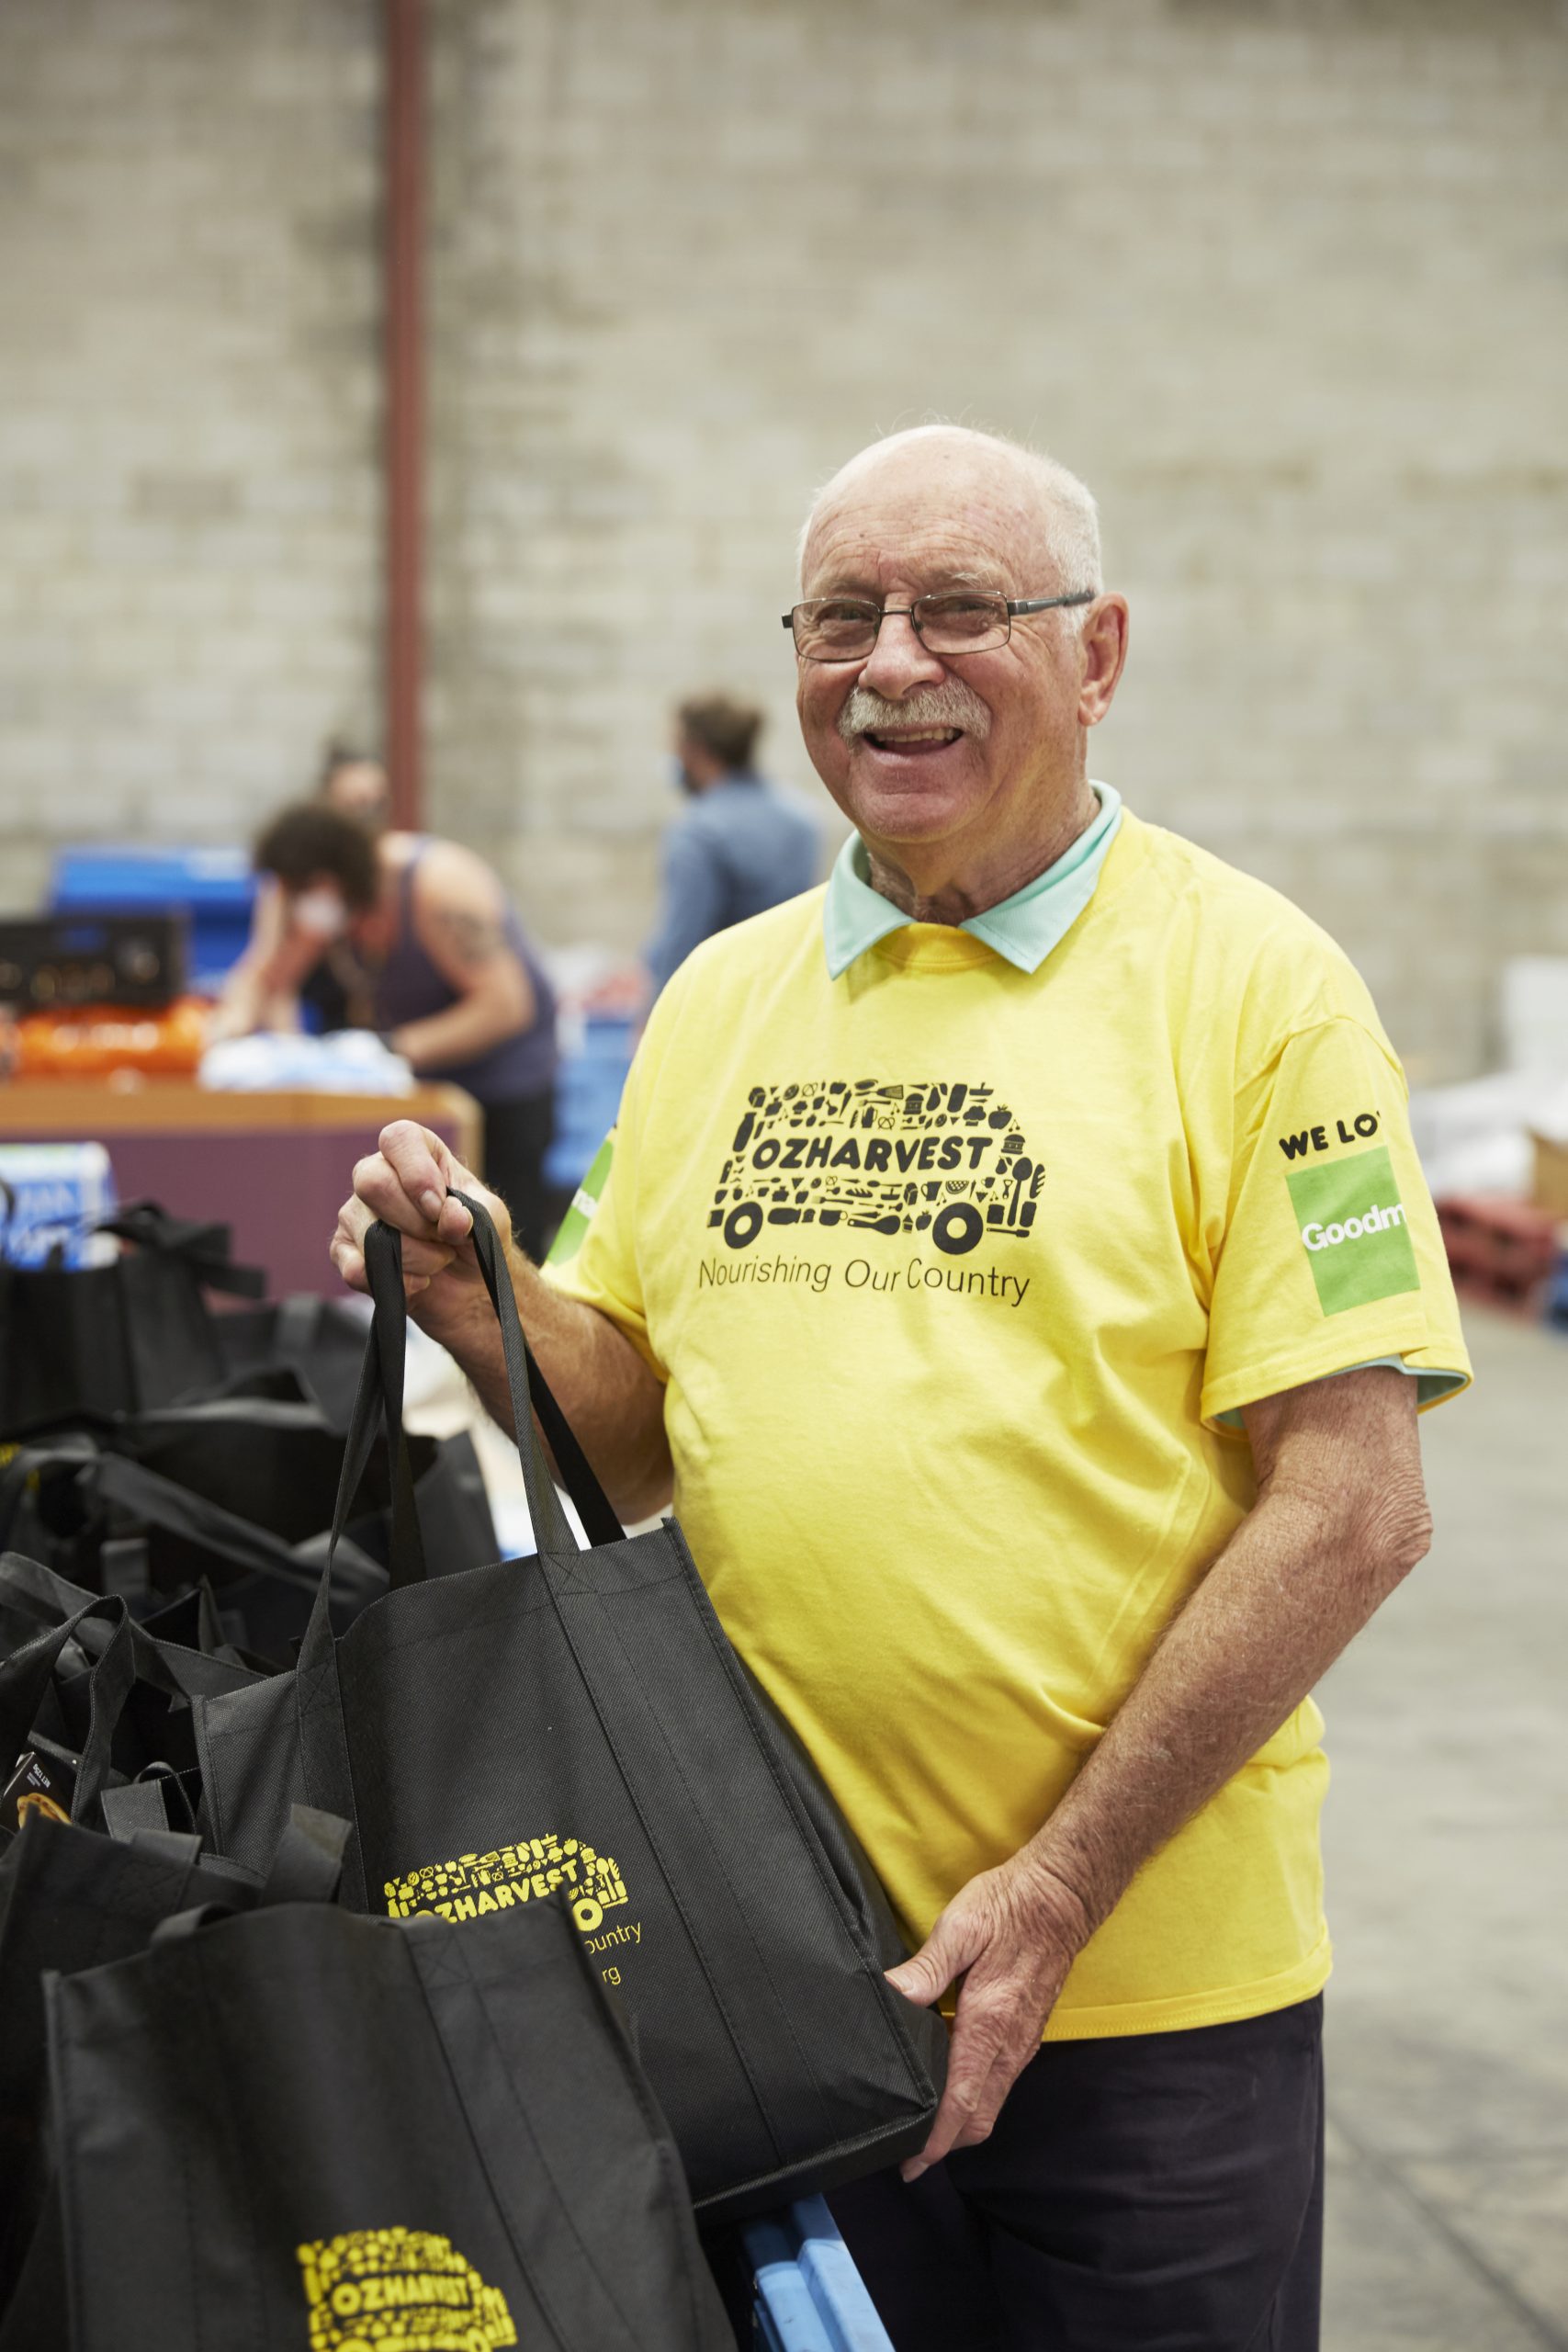 Ozharvest Volunteer Find Out How To Become A Volunteer With Us